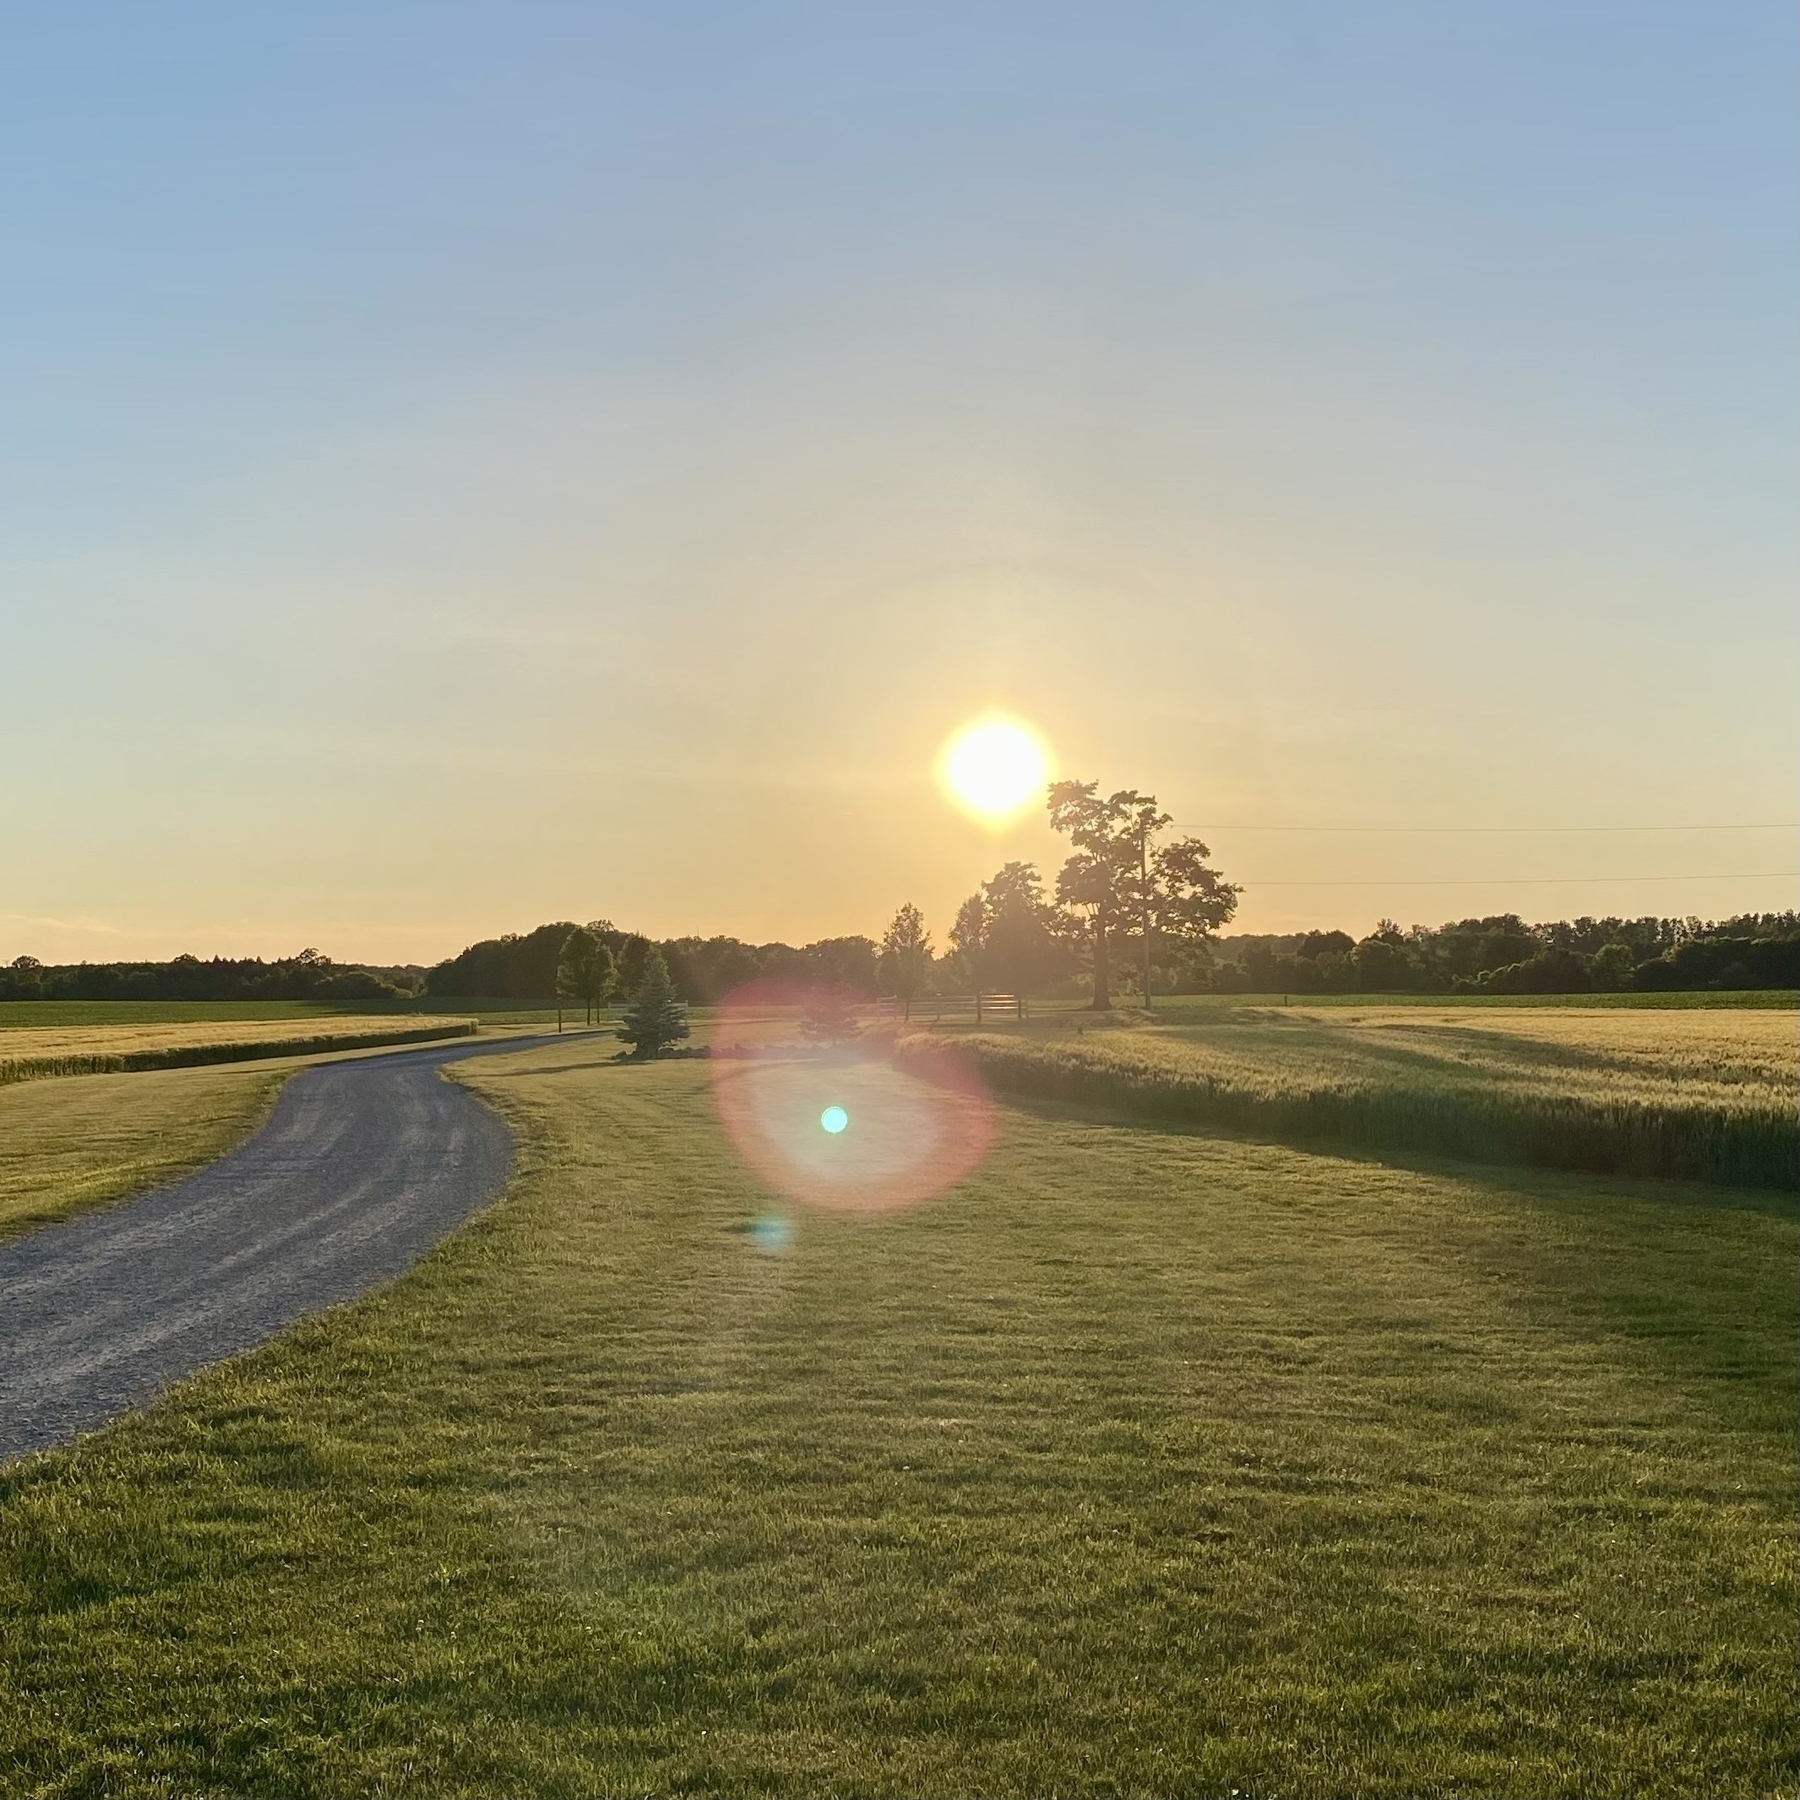 Sun setting behind a tree in the distance behind a field with a winding gravel path